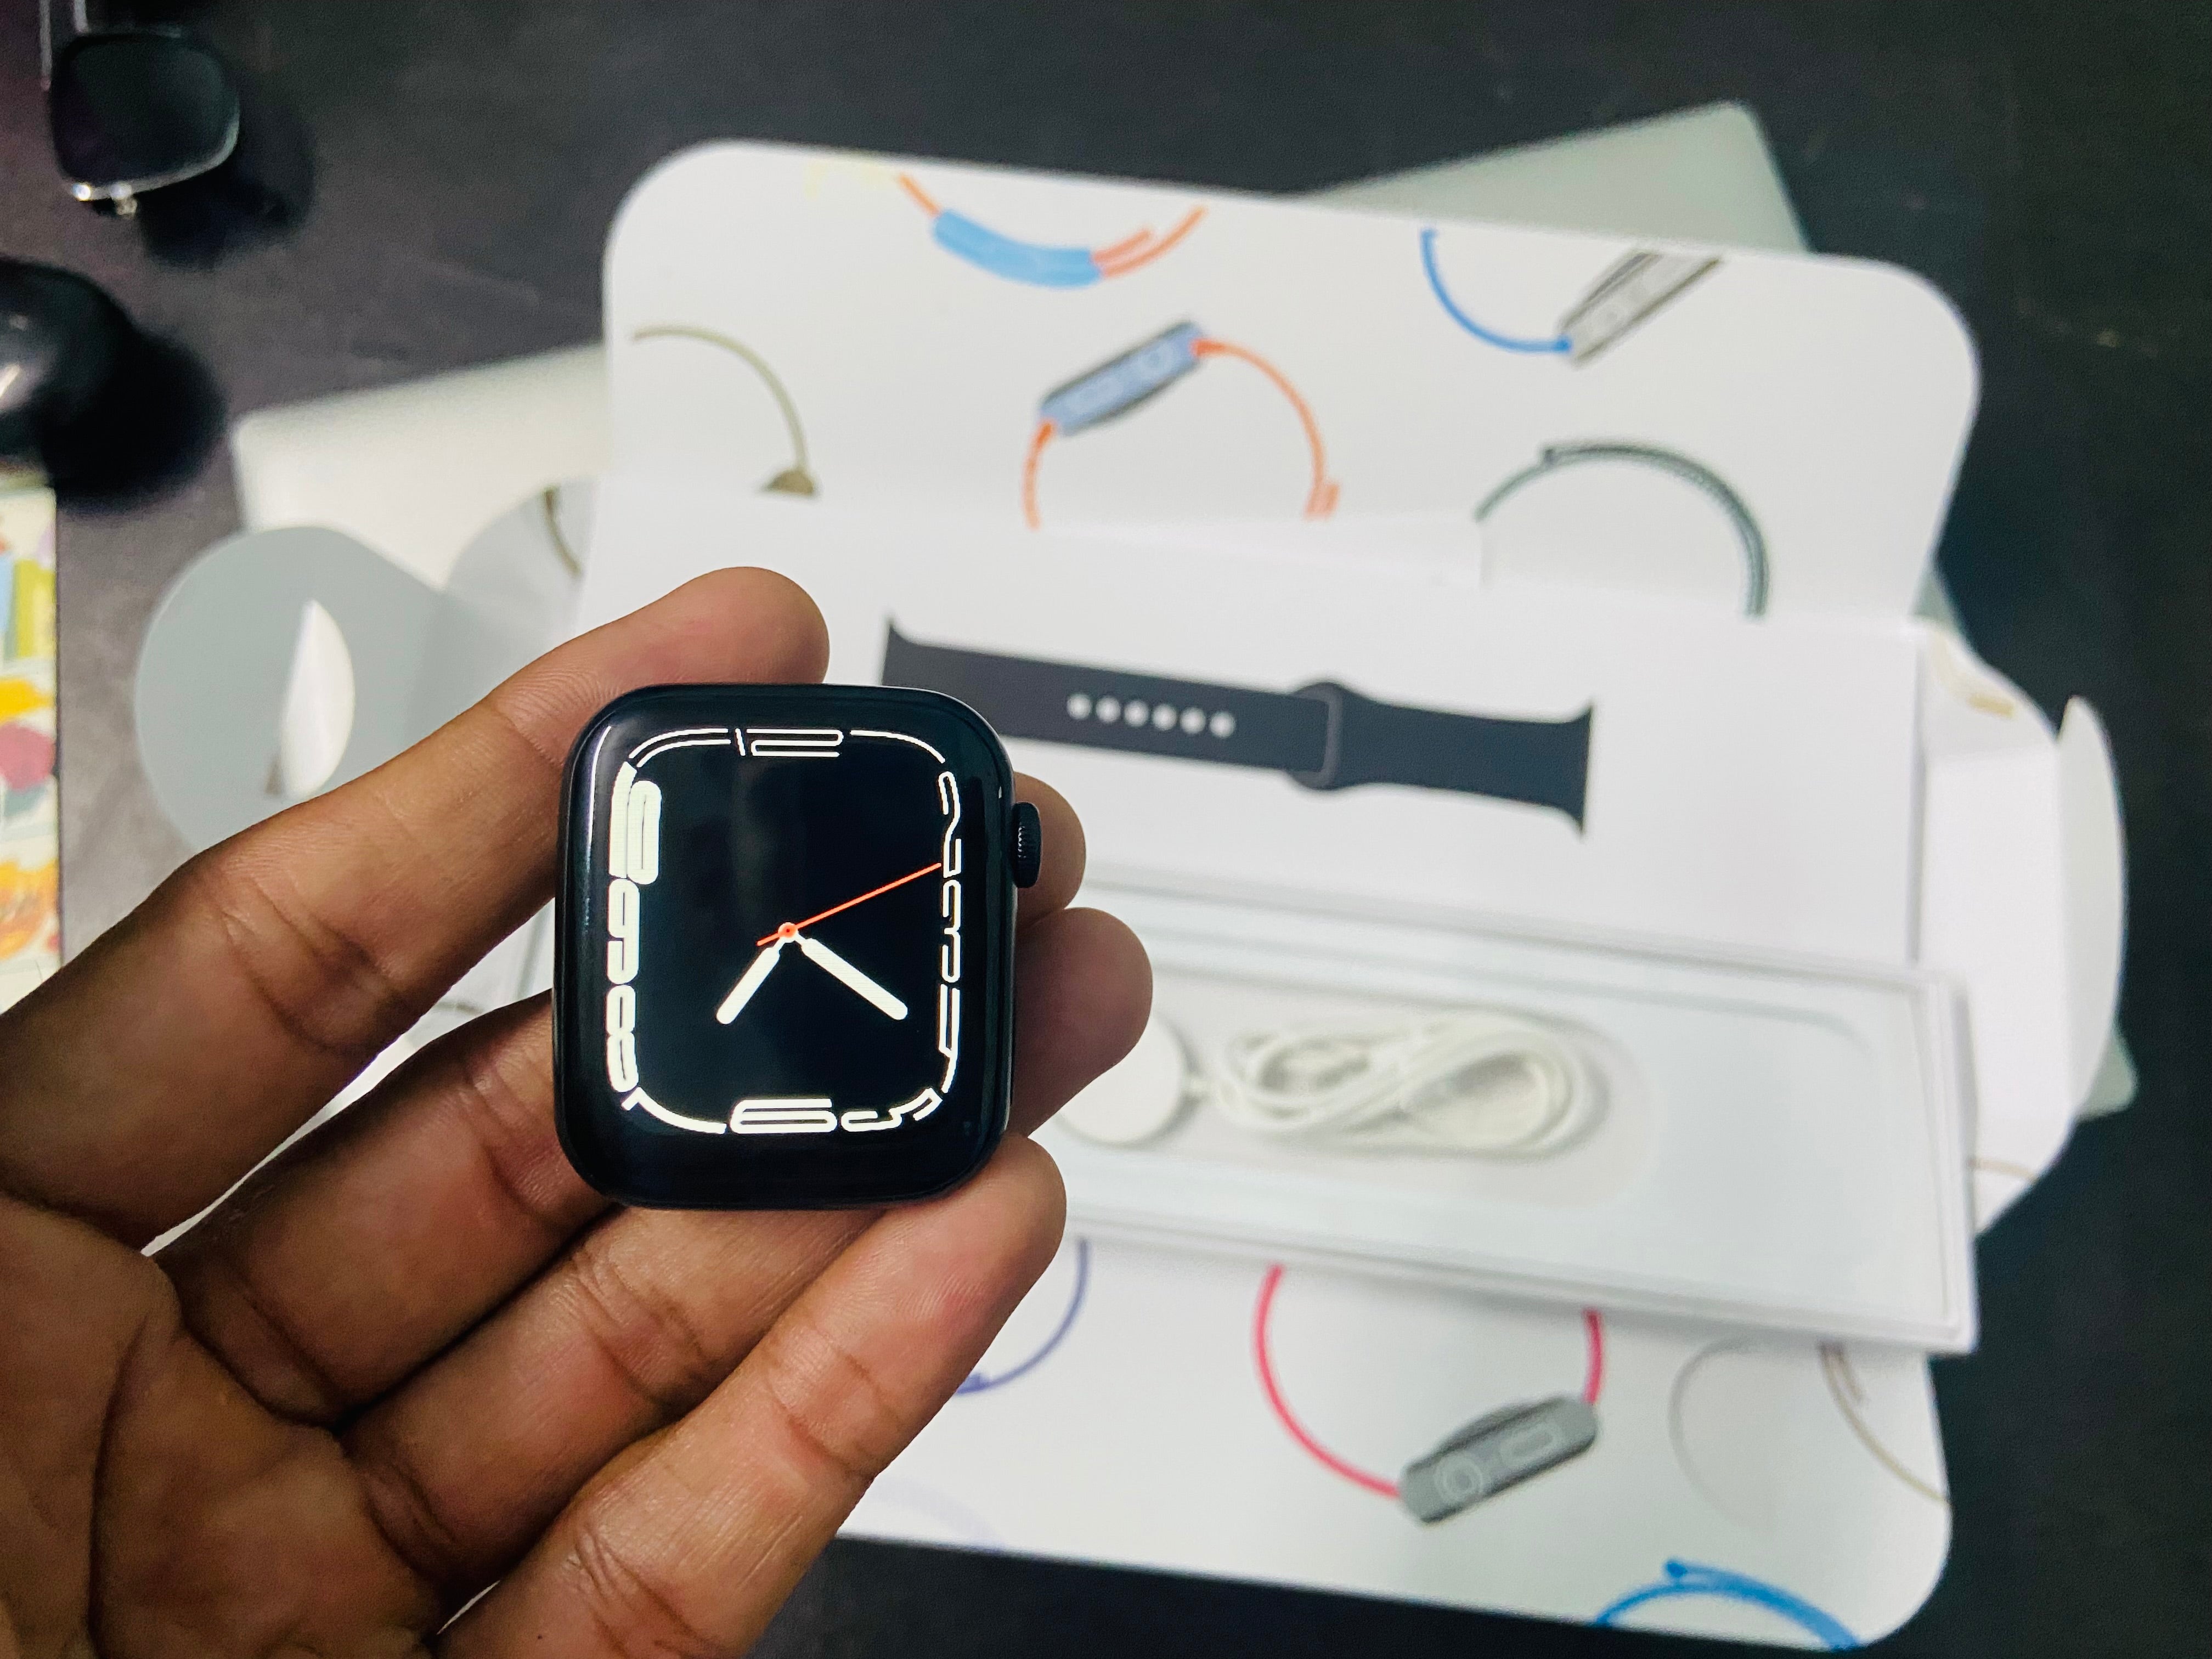 Apple Smart i Watch Series 7  45mm Logo Smart Watch  Infinity full Display  All Working  Compatible with Apple iPhone & Android Devices